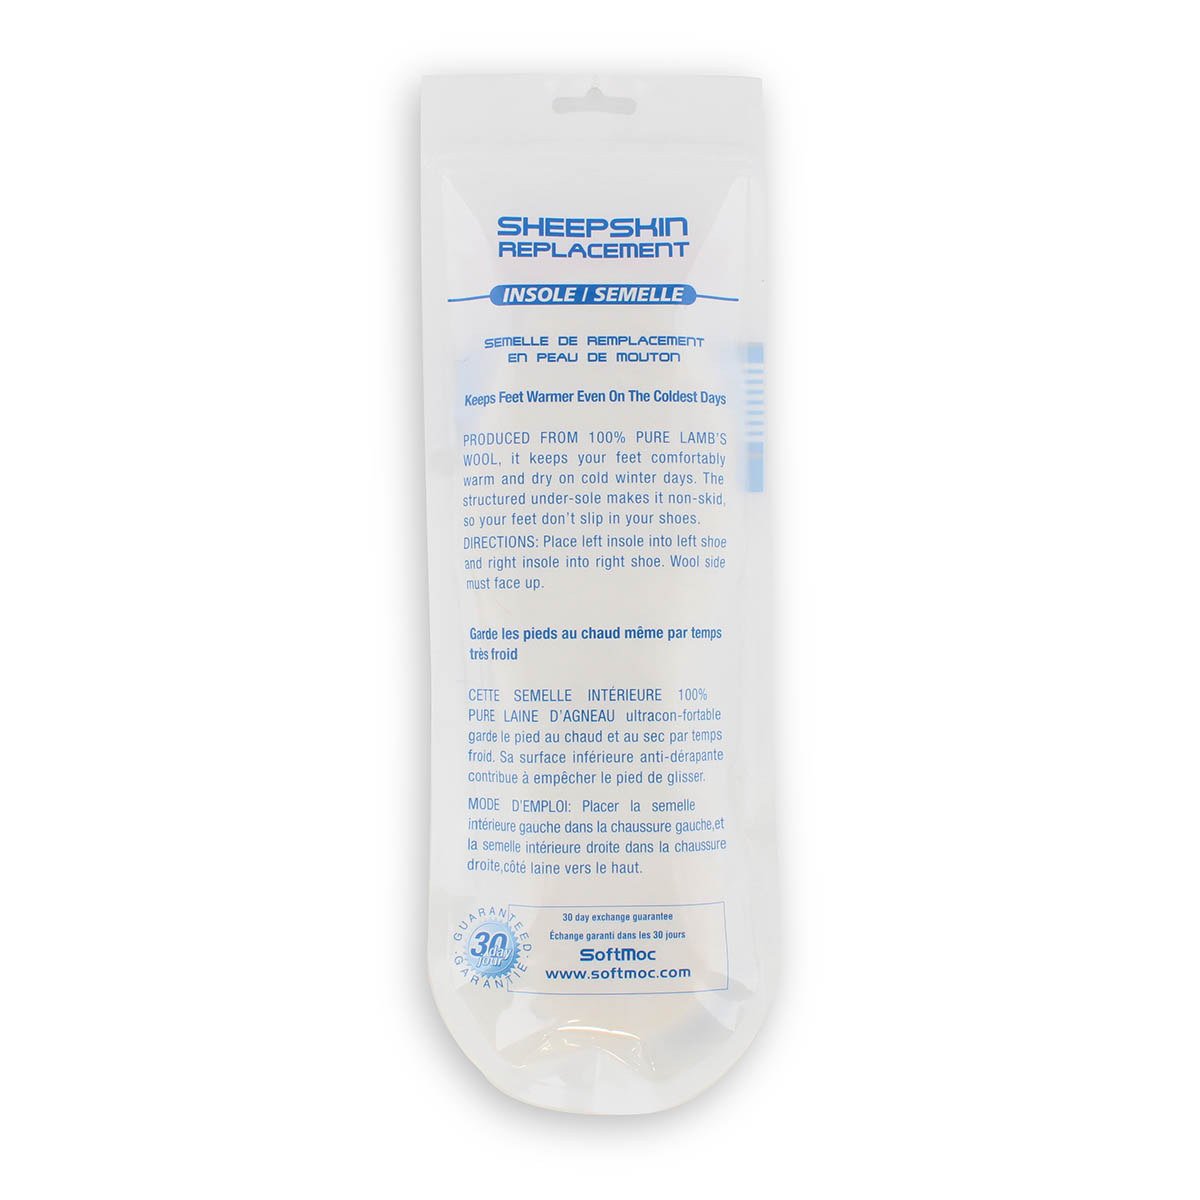 Women's Thermopolar Sheepskin Replacement Insole